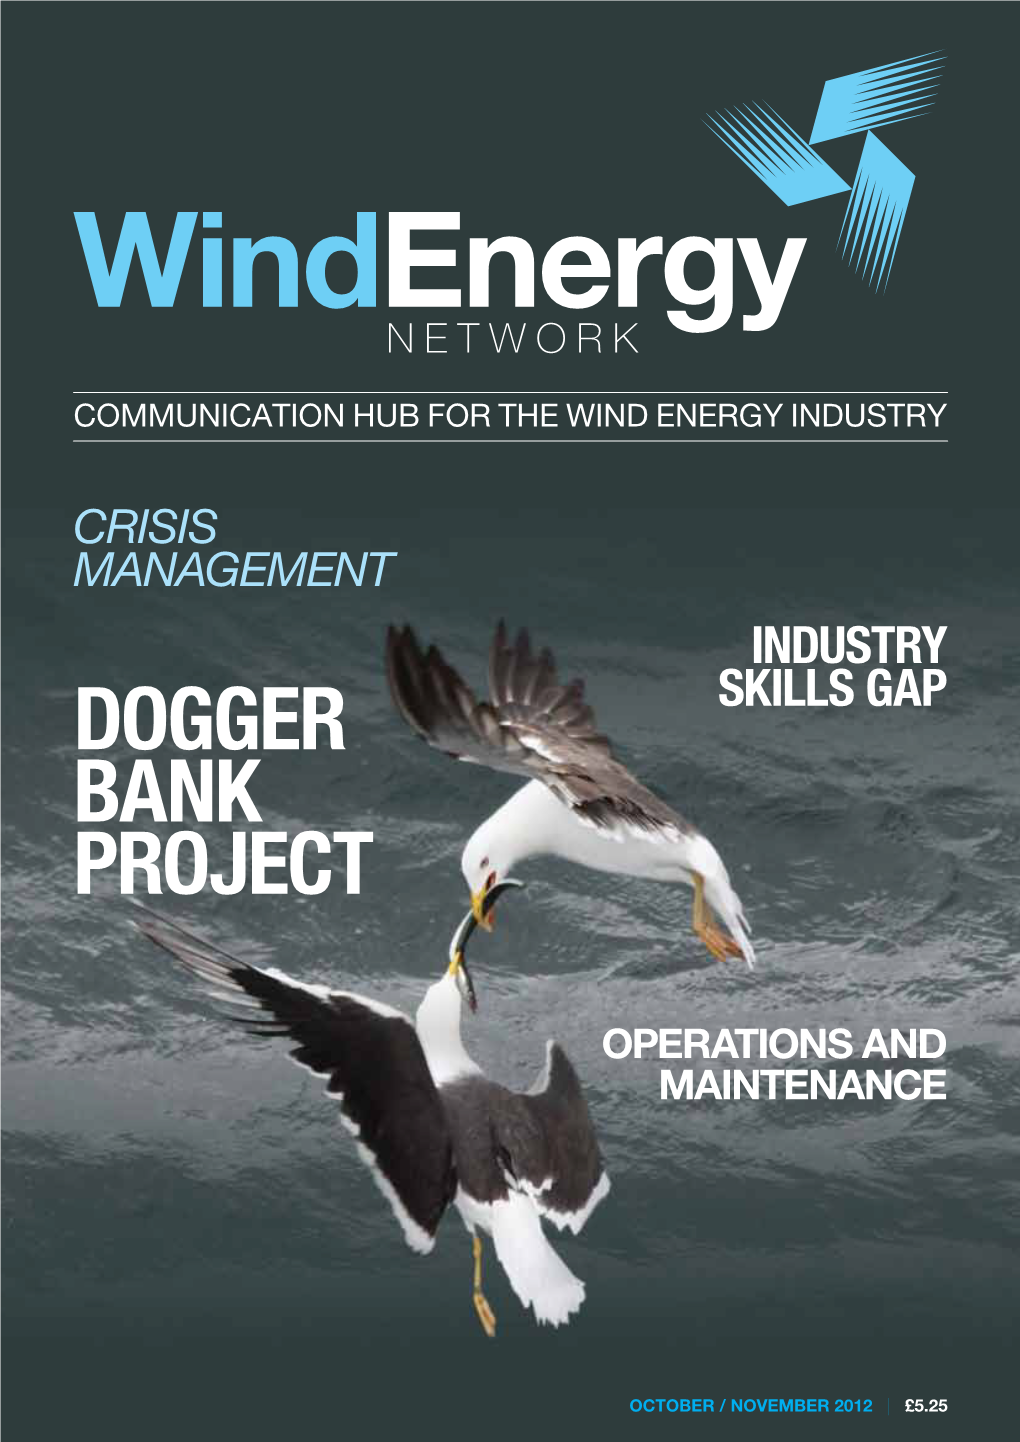 Dogger Bank Project – the Largest Wind Energy Project in the World Page 66 Oil Analysis Article from Exxon Mobil